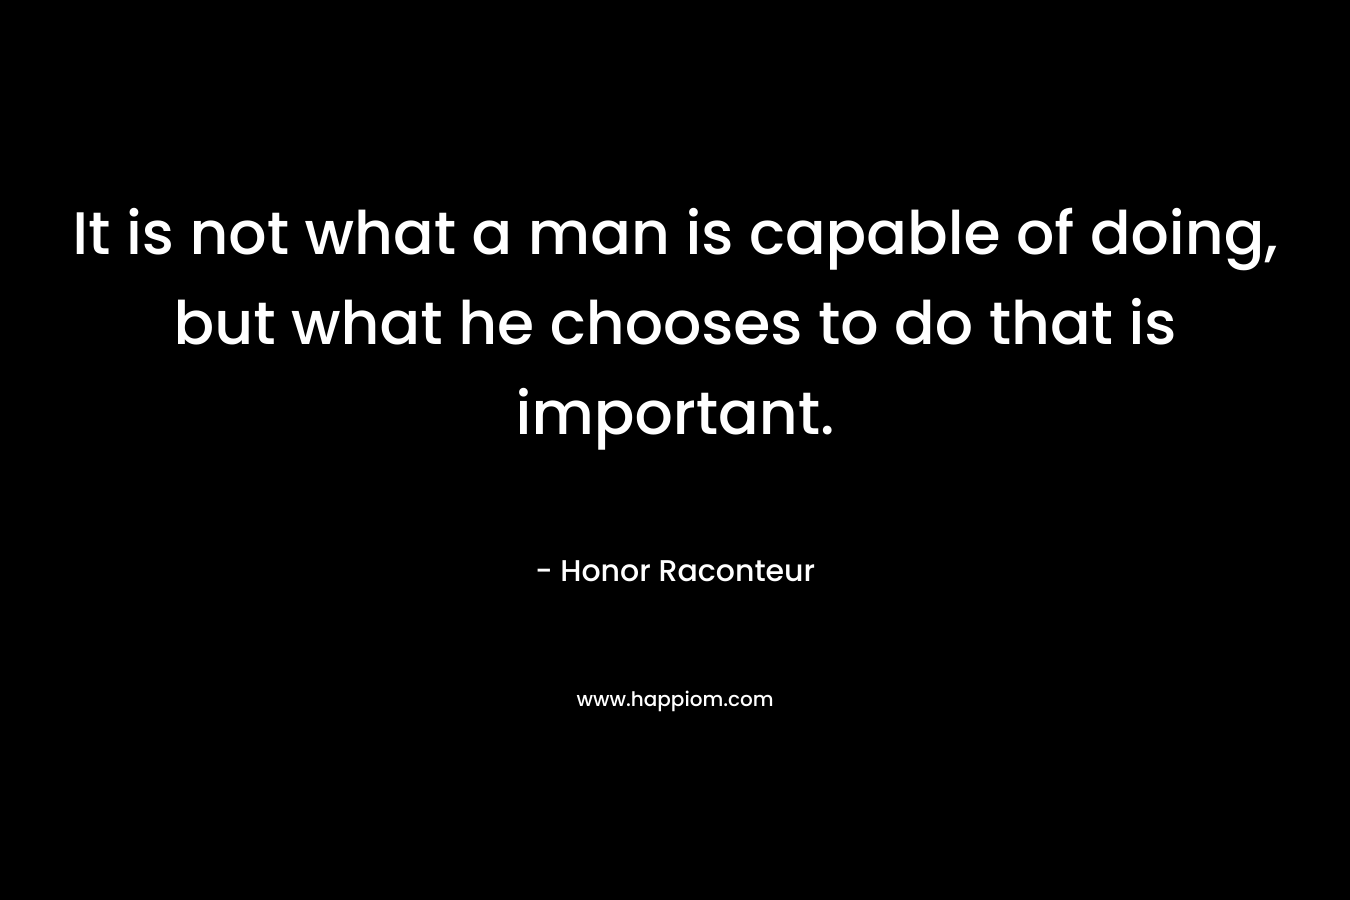 It is not what a man is capable of doing, but what he chooses to do that is important.